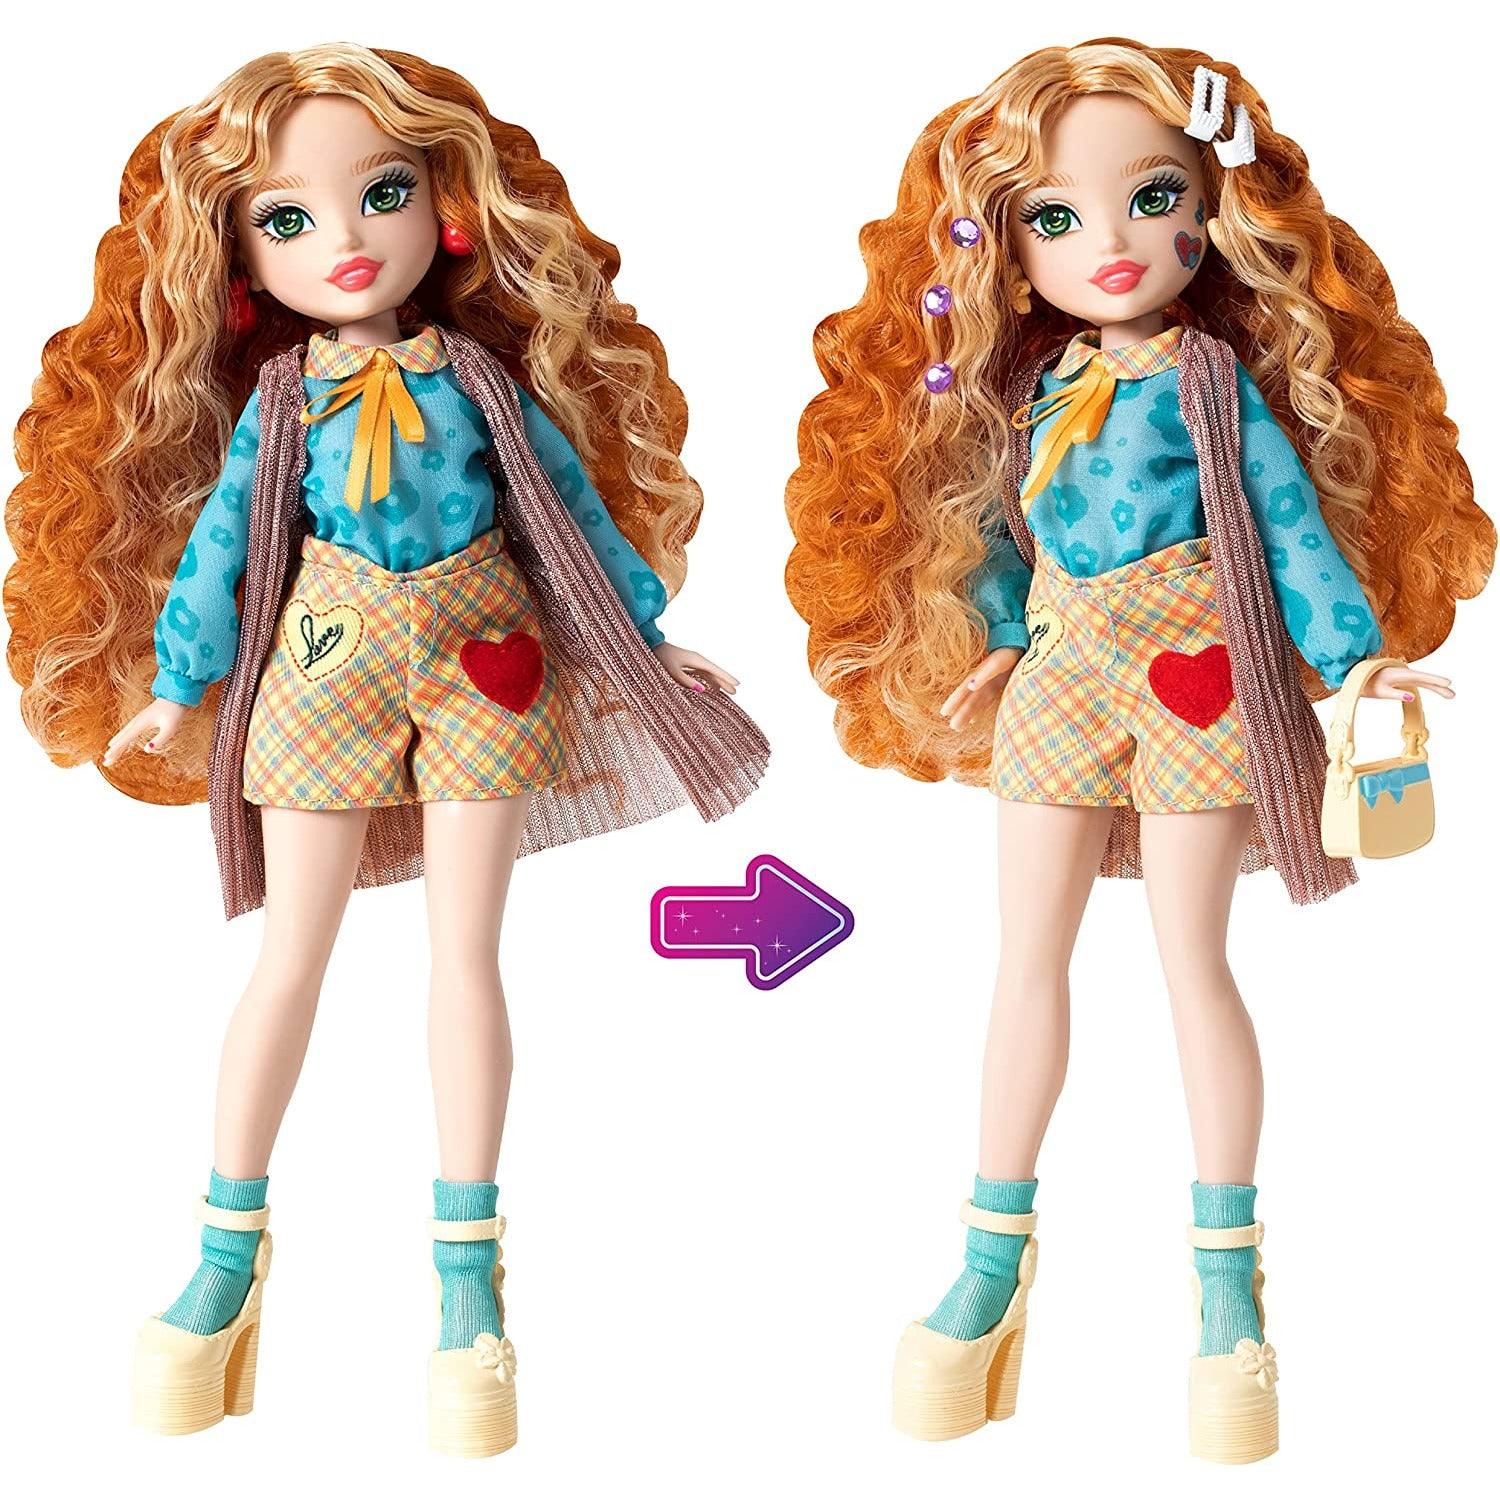 GLO-UP Girls Season 2 Rose Redhead Fashion Doll - BumbleToys - 5-7 Years, Barbie, Barbie Extra, Dolls, Fashion Dolls & Accessories, Girls, Miniature Dolls & Accessories, OXE, Pre-Order